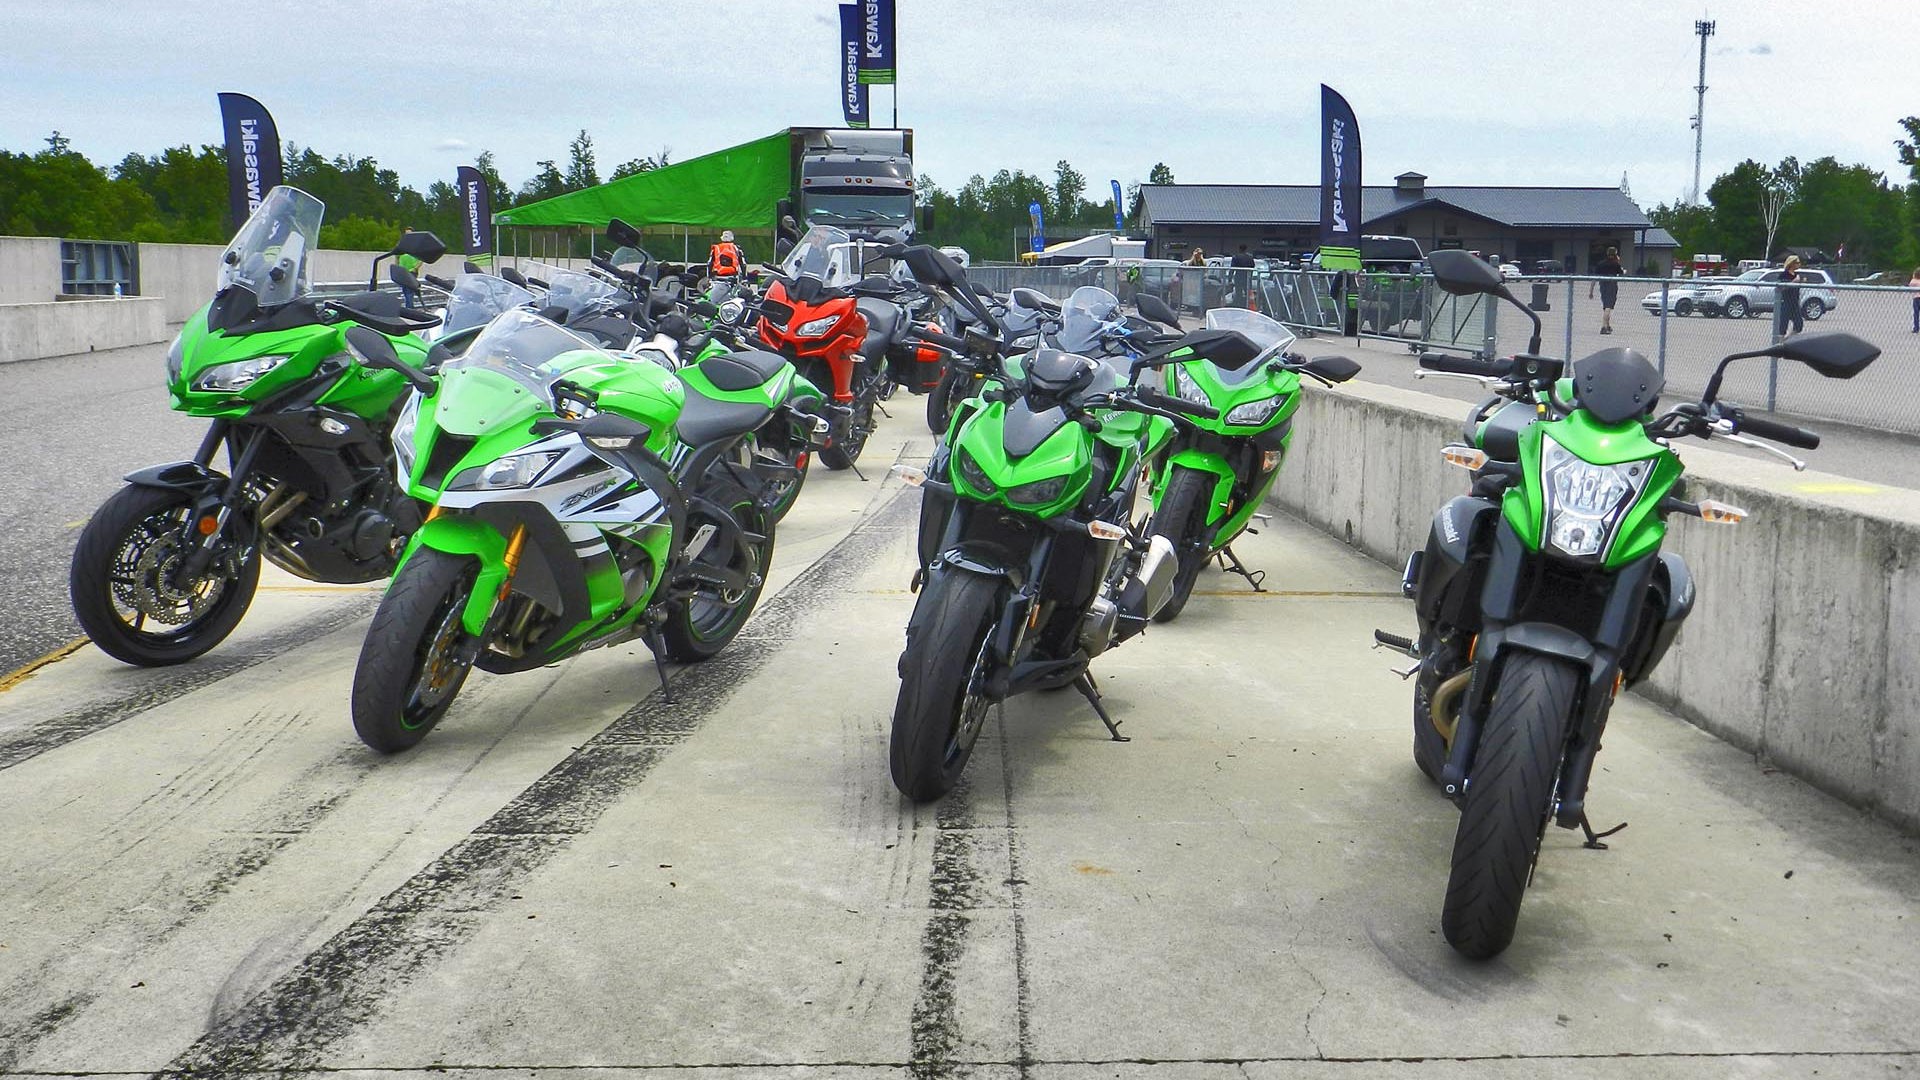 Left to right: Versys 650, ZX-10R, Z1000, ER-6n